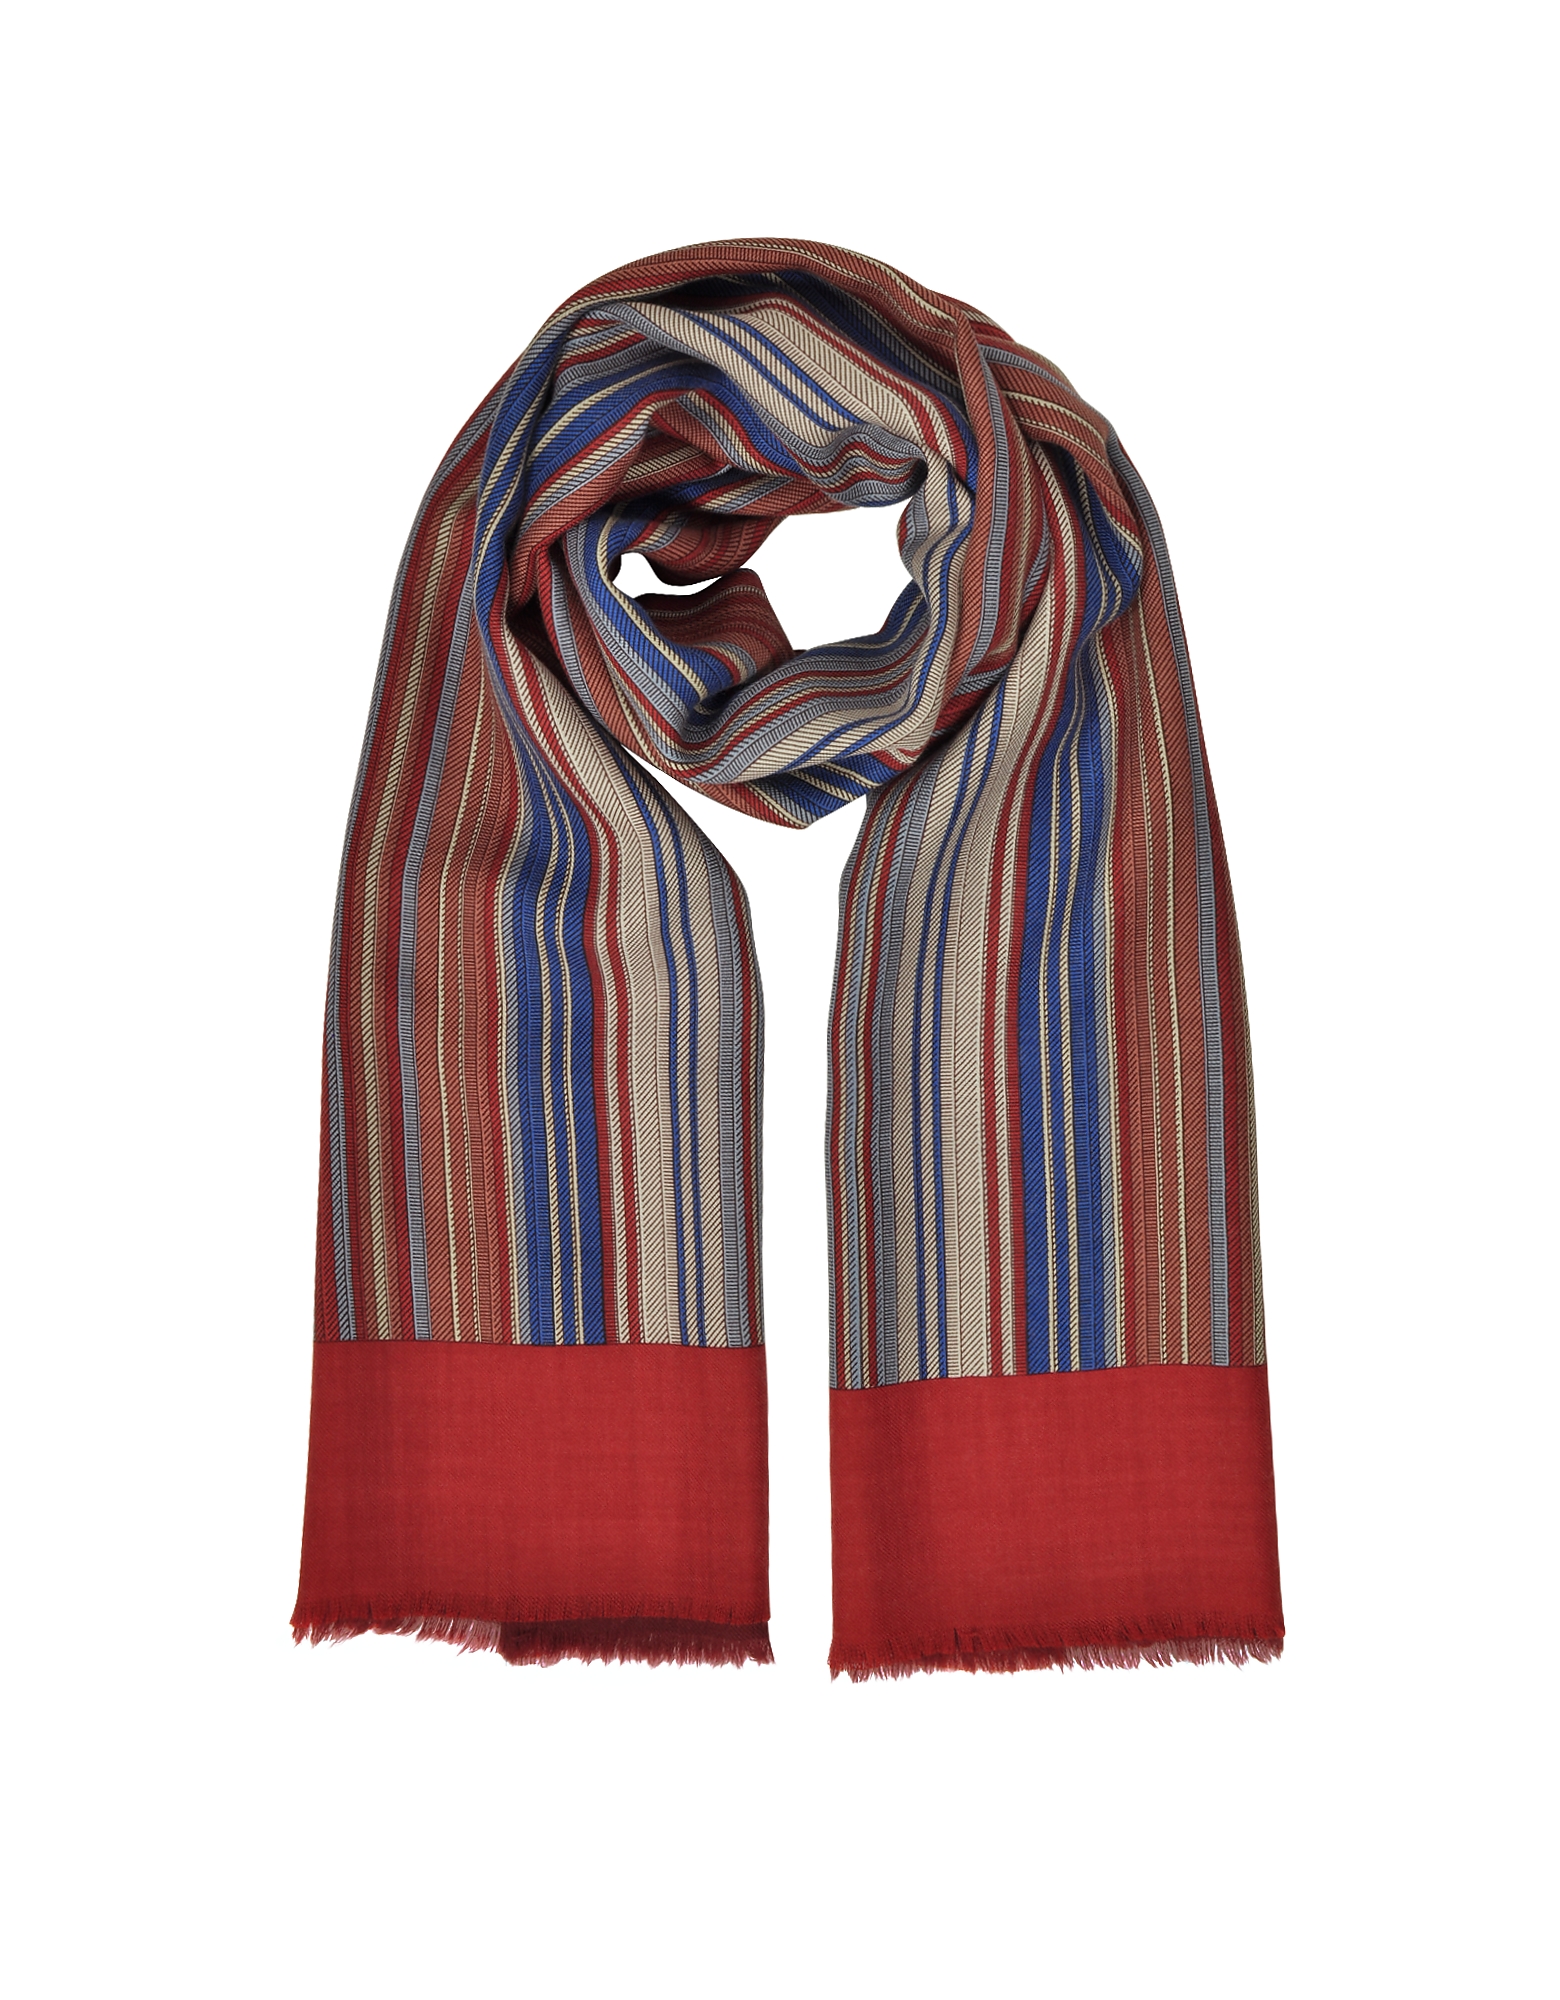 Laura Biagiotti Stripes Printed Wool, Silk and Cashmere Long Scarf